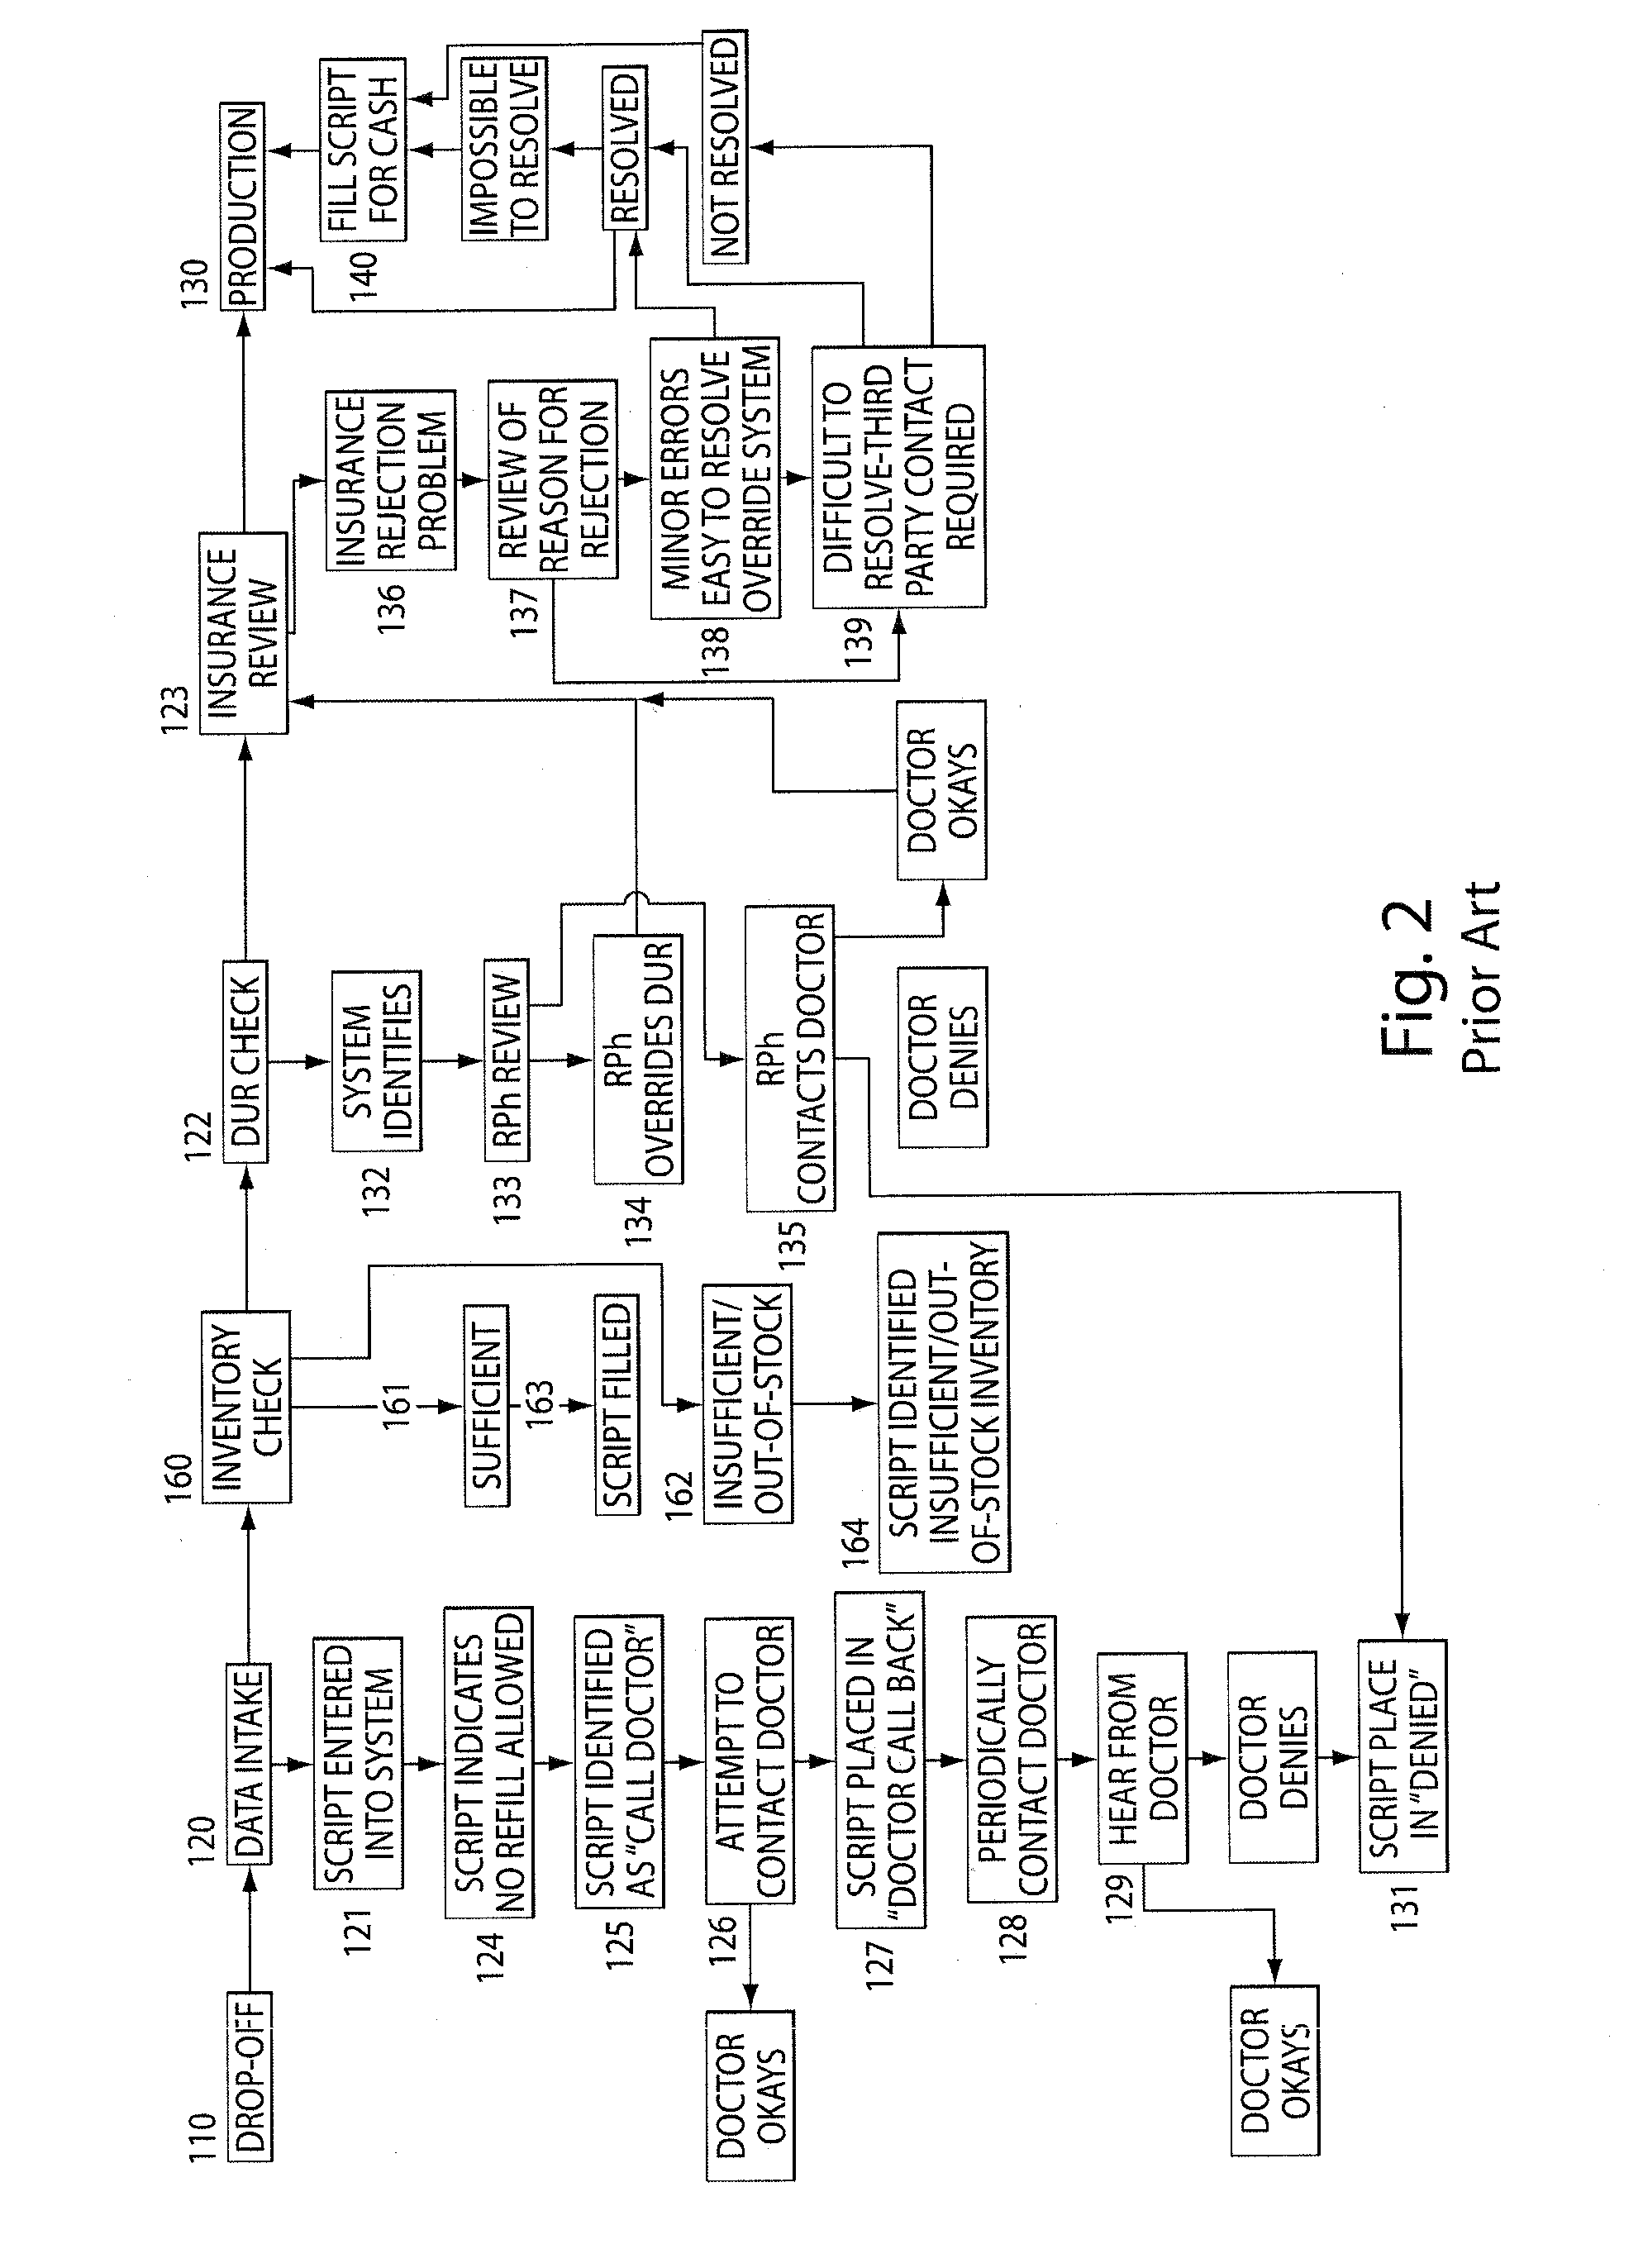 System and Methods of Providing Pharmacy Services